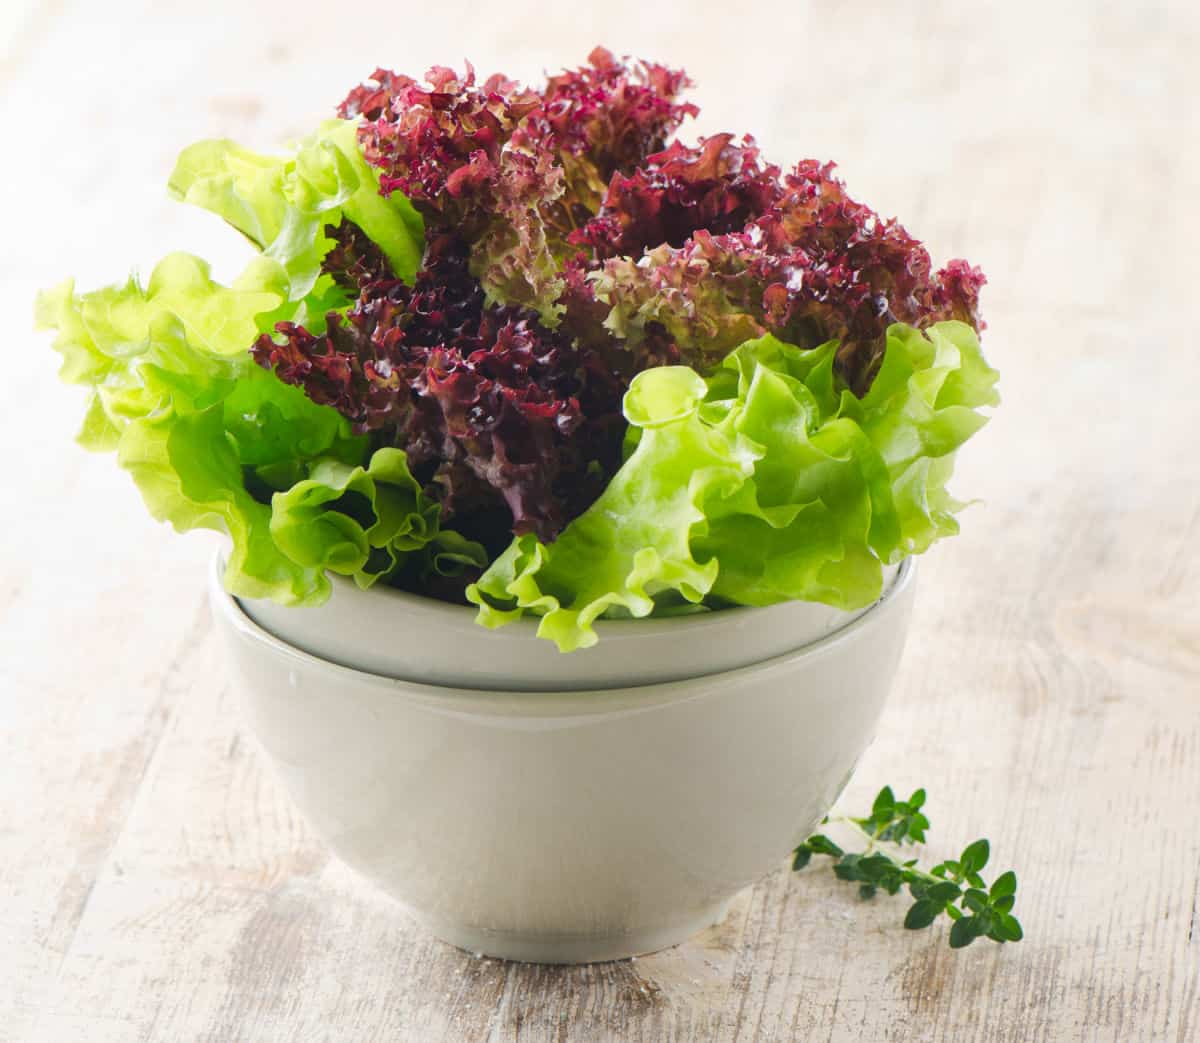 Lettuce salad in a bowl on a wooden table